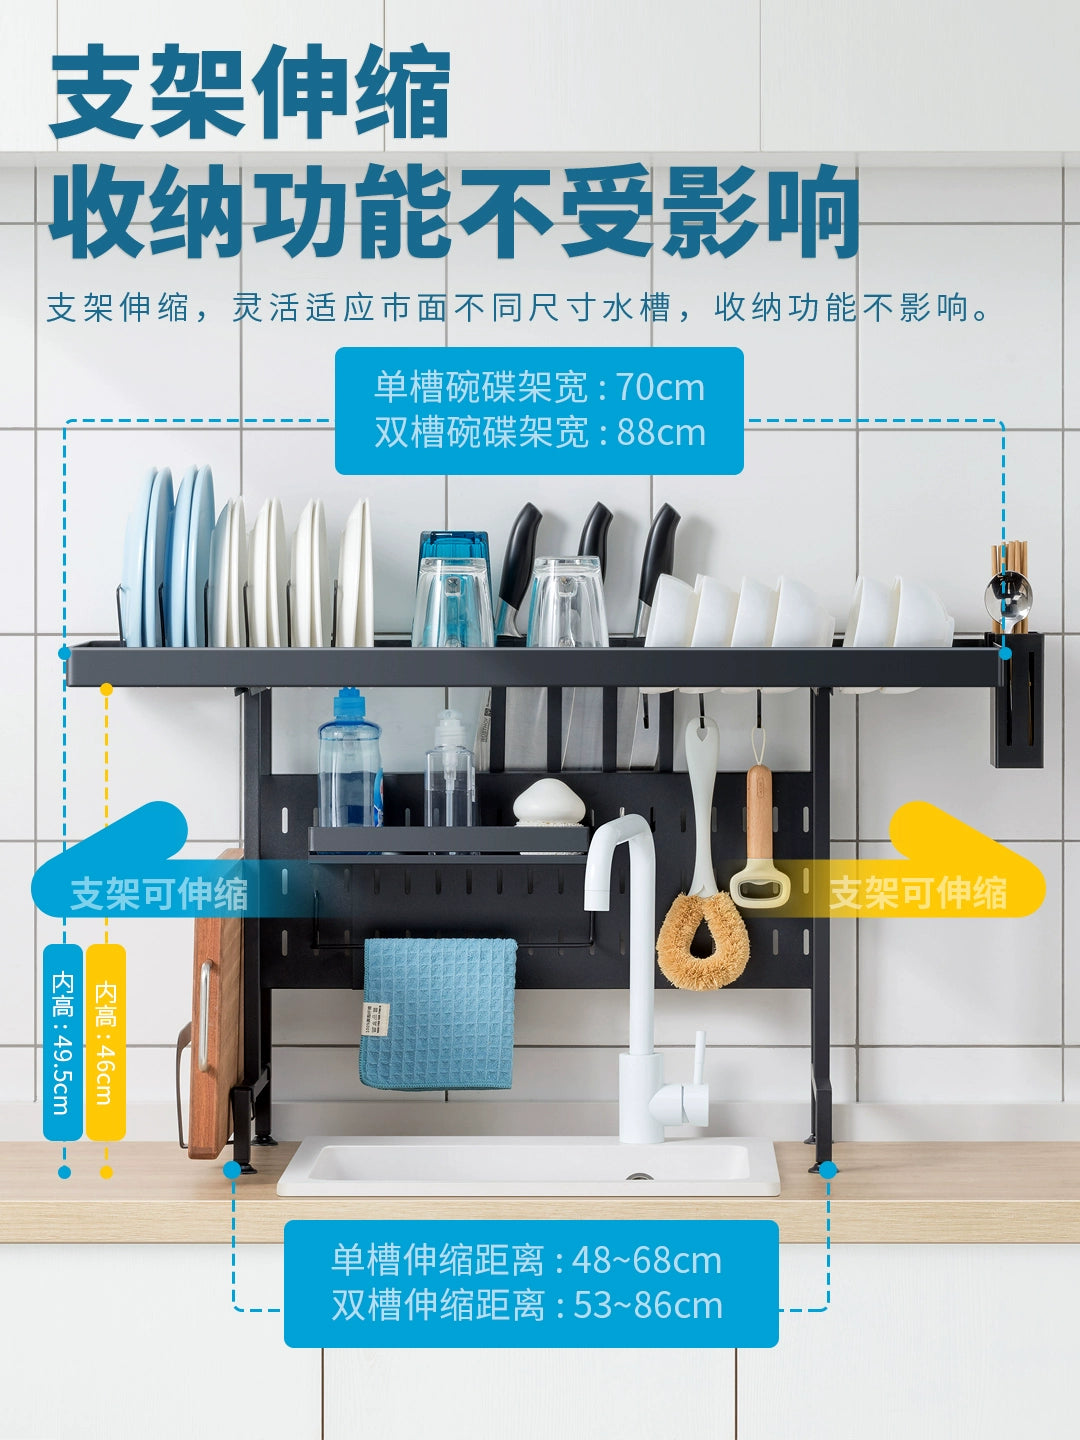 Retractable Kitchen Sink Storage Shelf Countertop Place Bowls and Dishes Chopsticks Multi-Functional Domestic Sink Top Draining Storage Rack